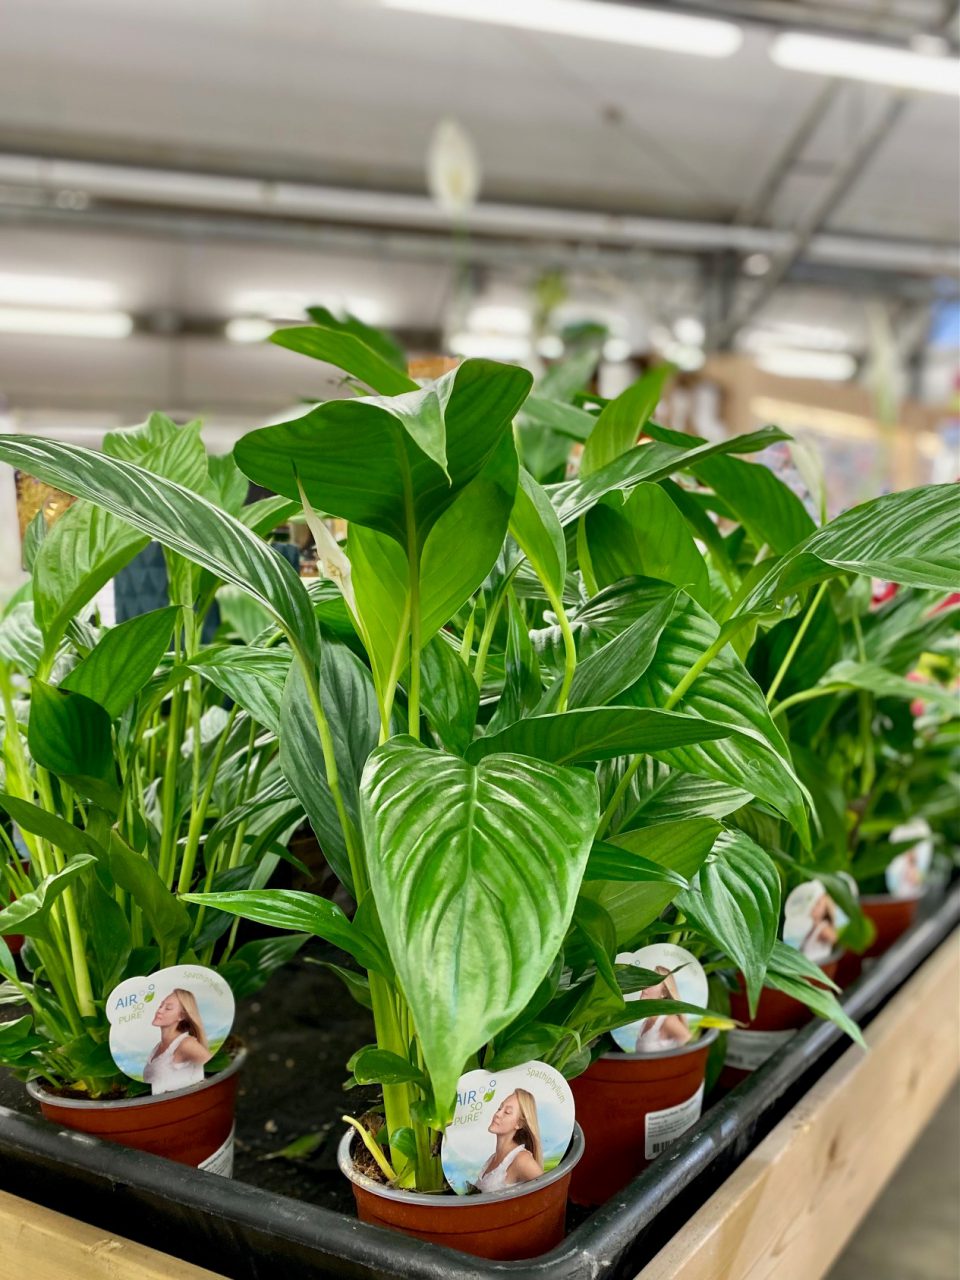 Spathiphyllum (Peace lily)